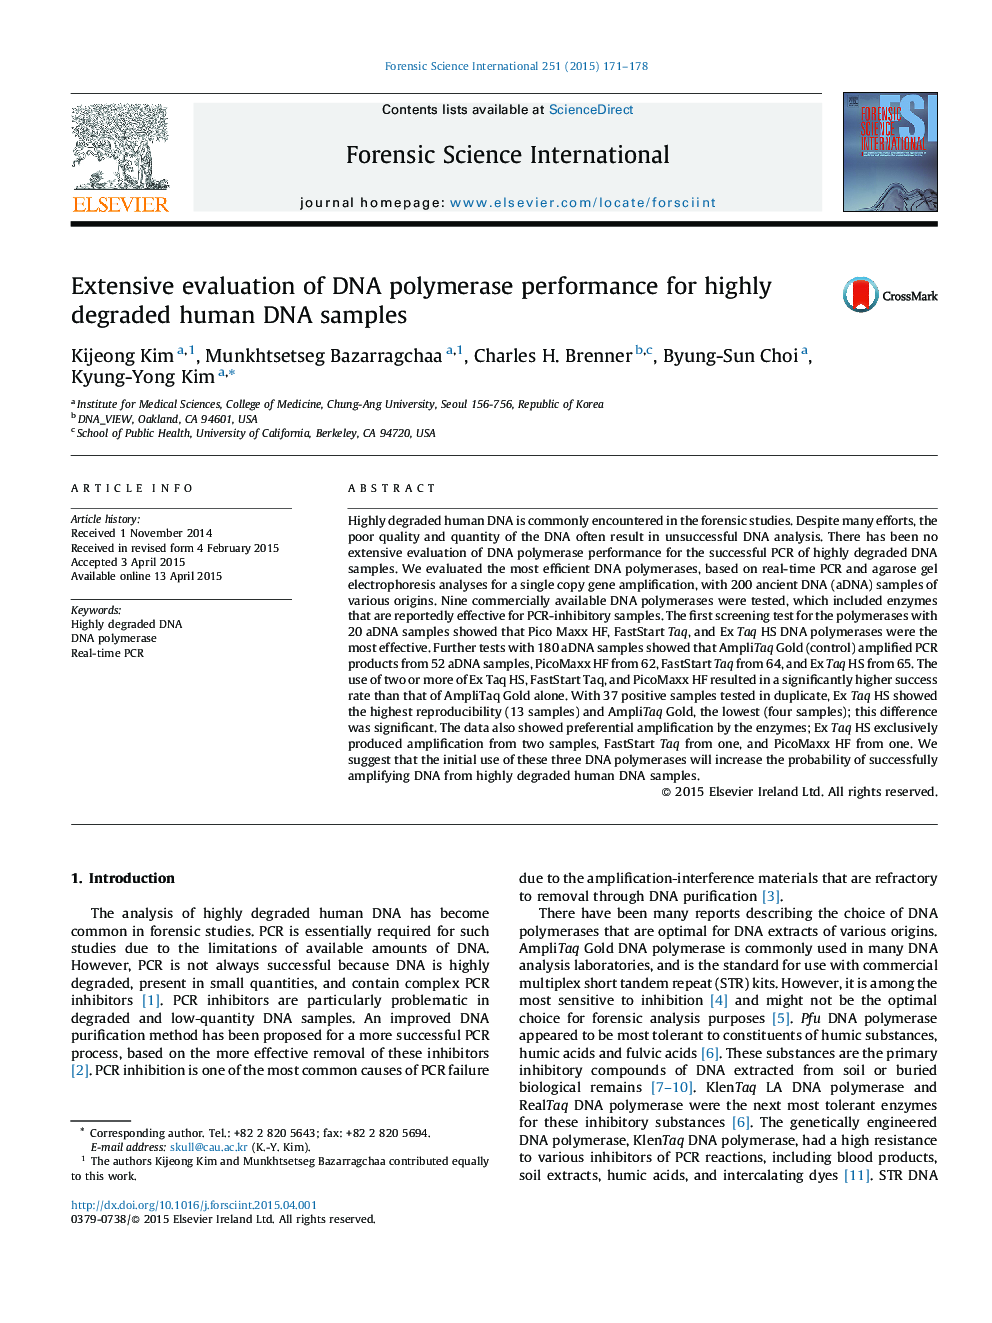 Extensive evaluation of DNA polymerase performance for highly degraded human DNA samples